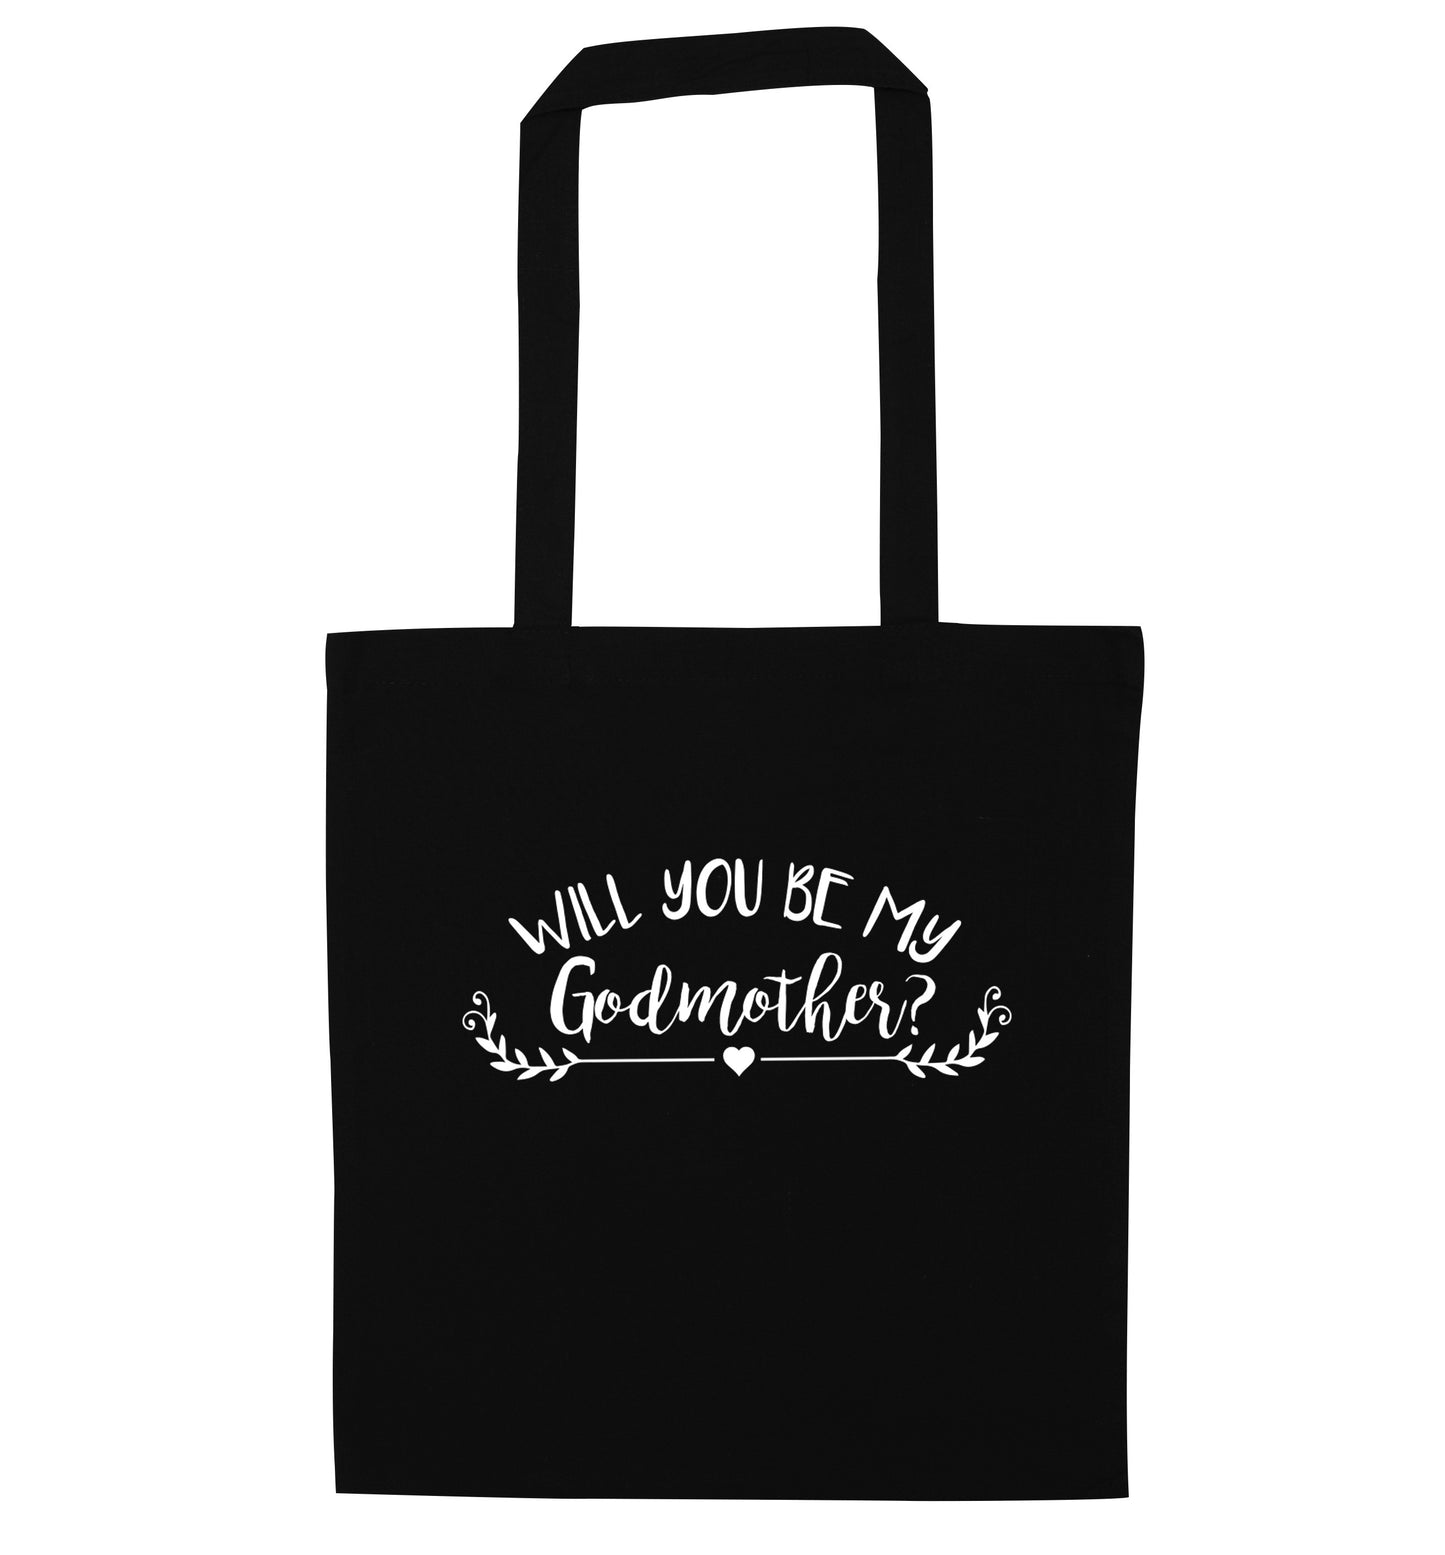 Will you be my godmother? black tote bag